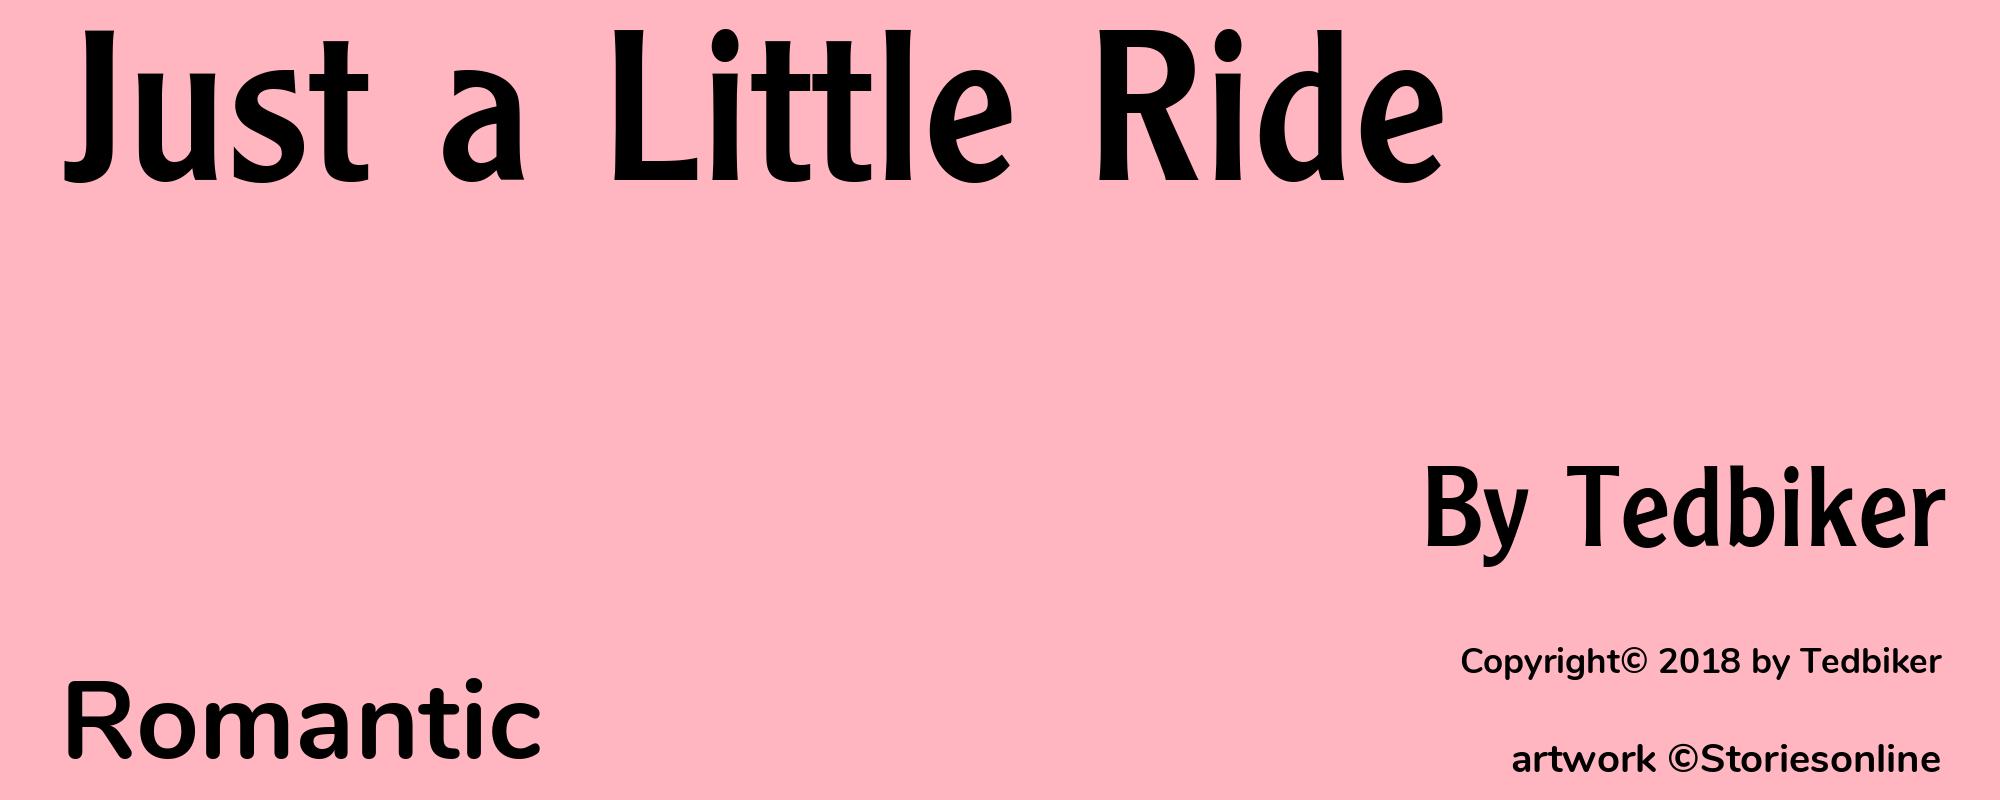 Just a Little Ride - Cover